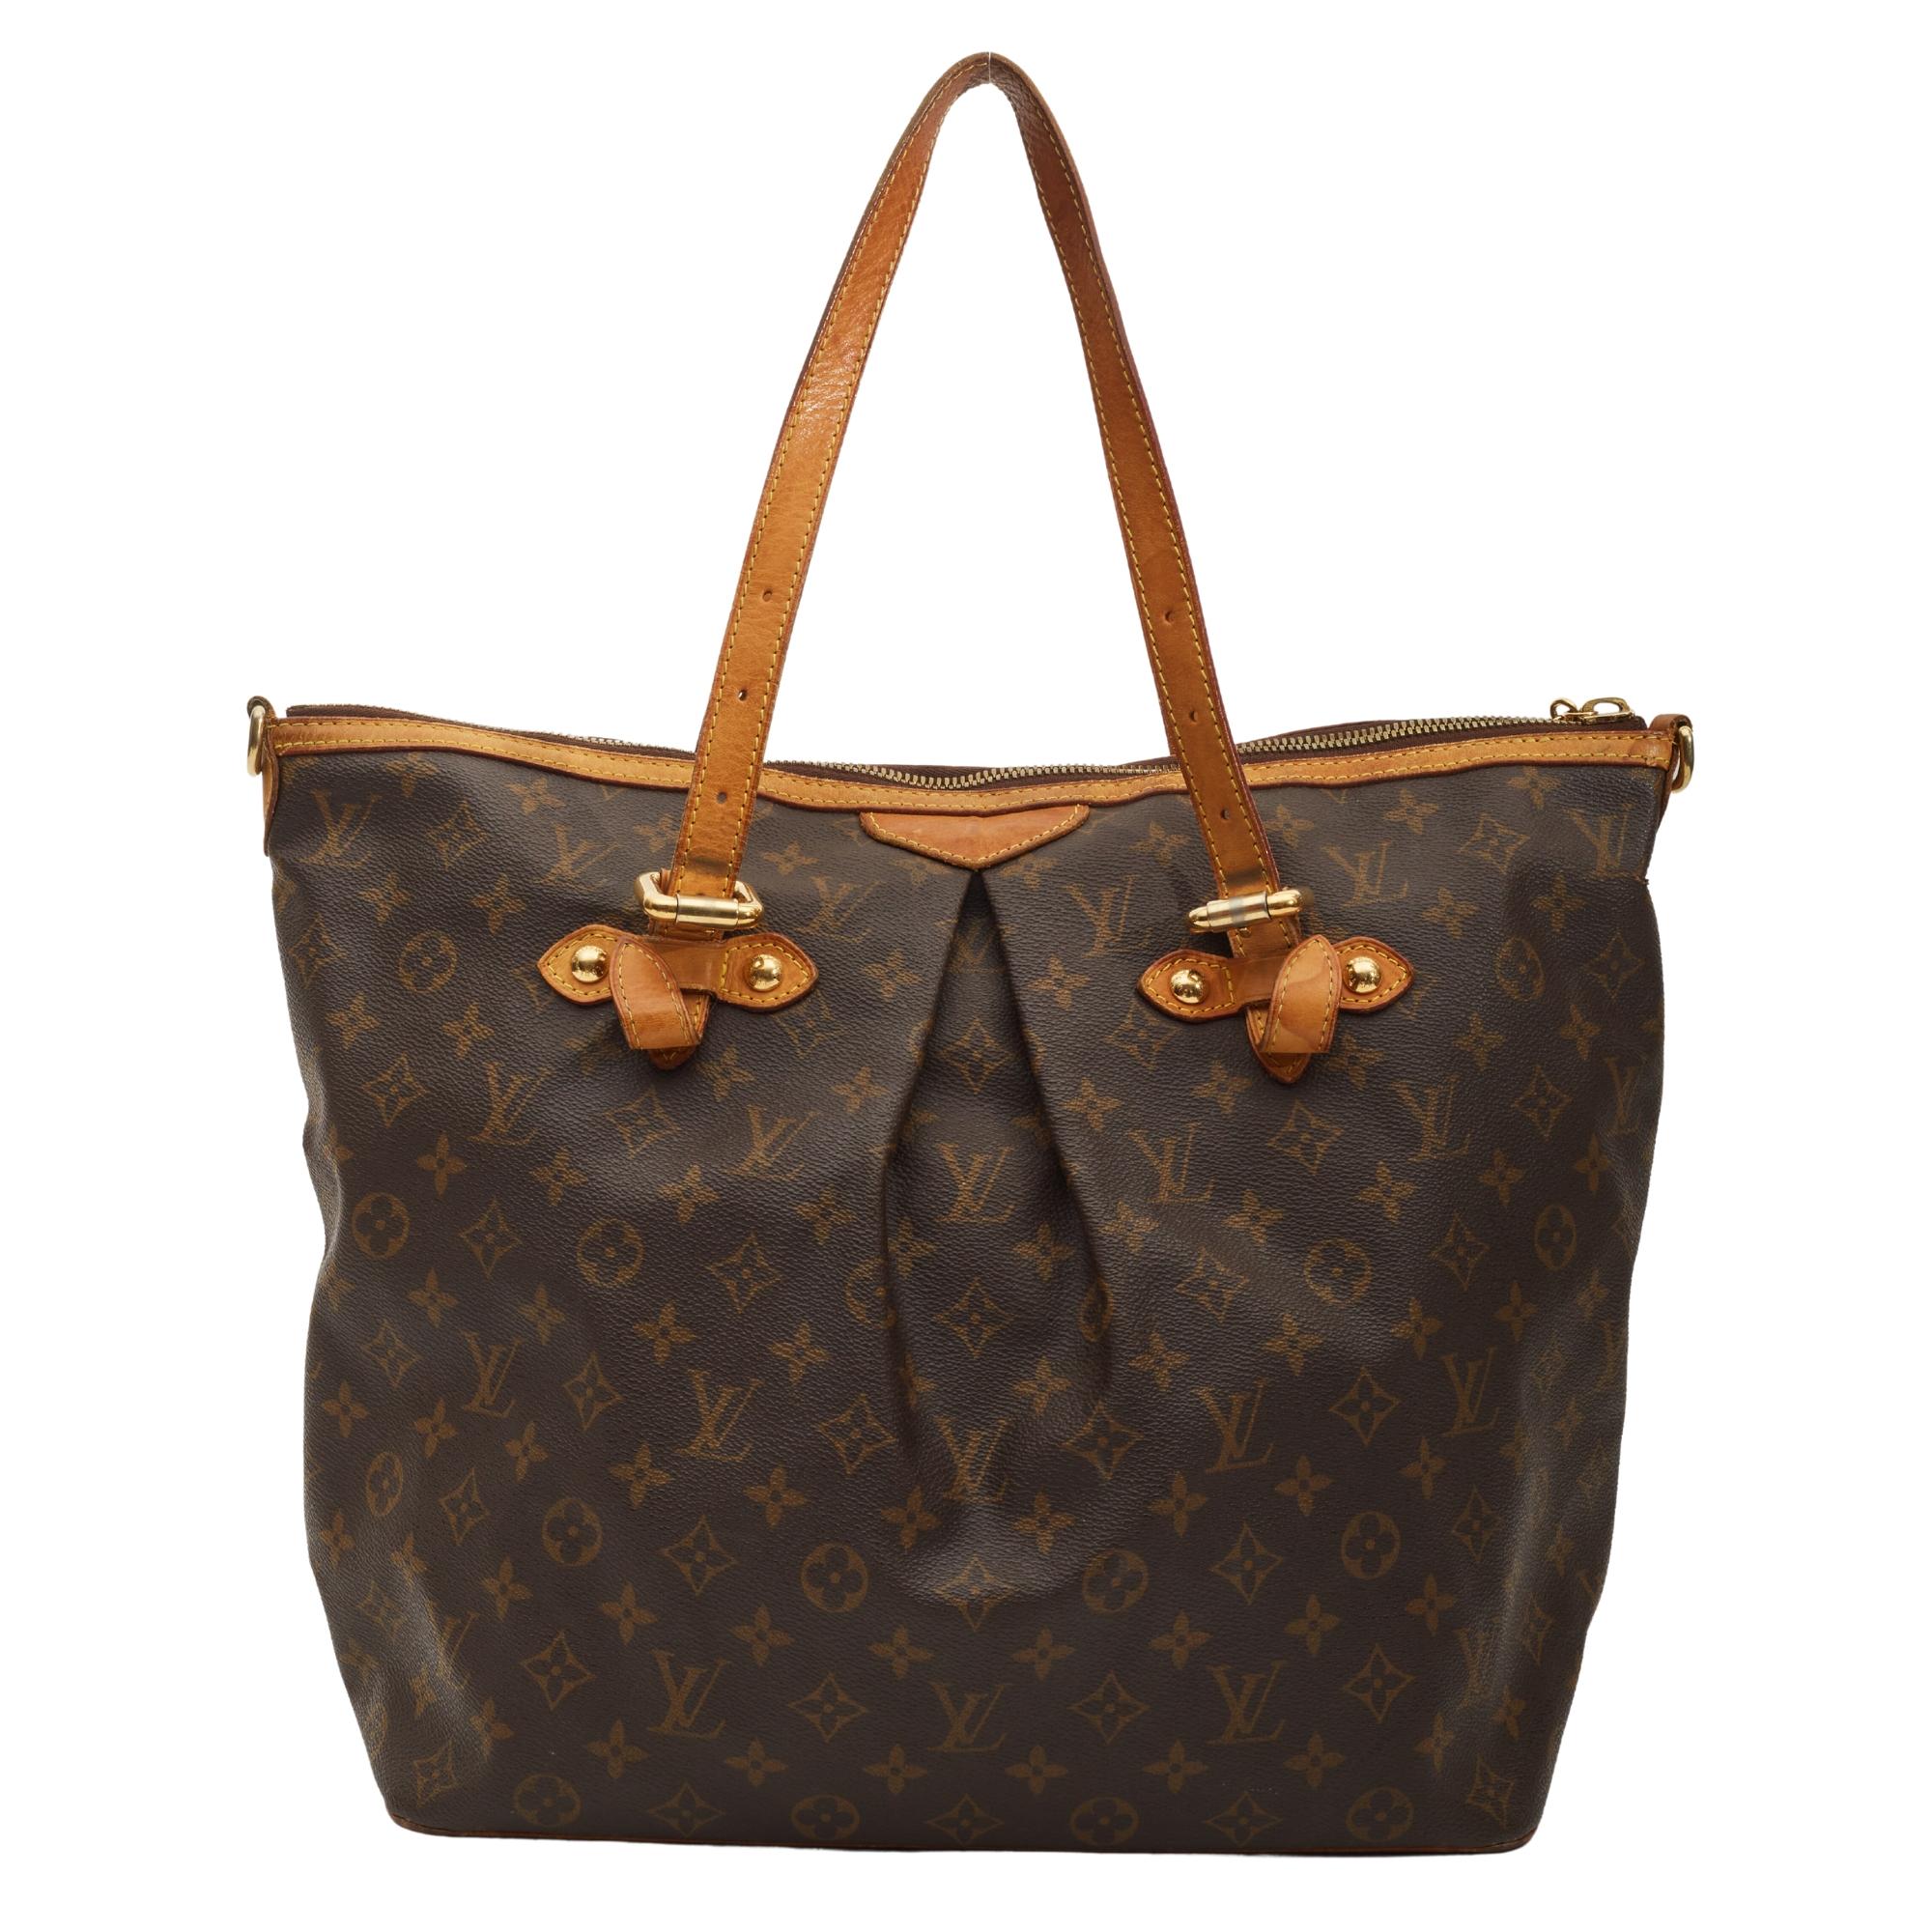 This tote is made of classic Louis Vuitton monogram print on toile canvas. This bag features dual vachetta cowhide flat leather top handles, gold tone hardware, top zip closure, a Louis logo zipper pull and natural leather finishes throughout. The